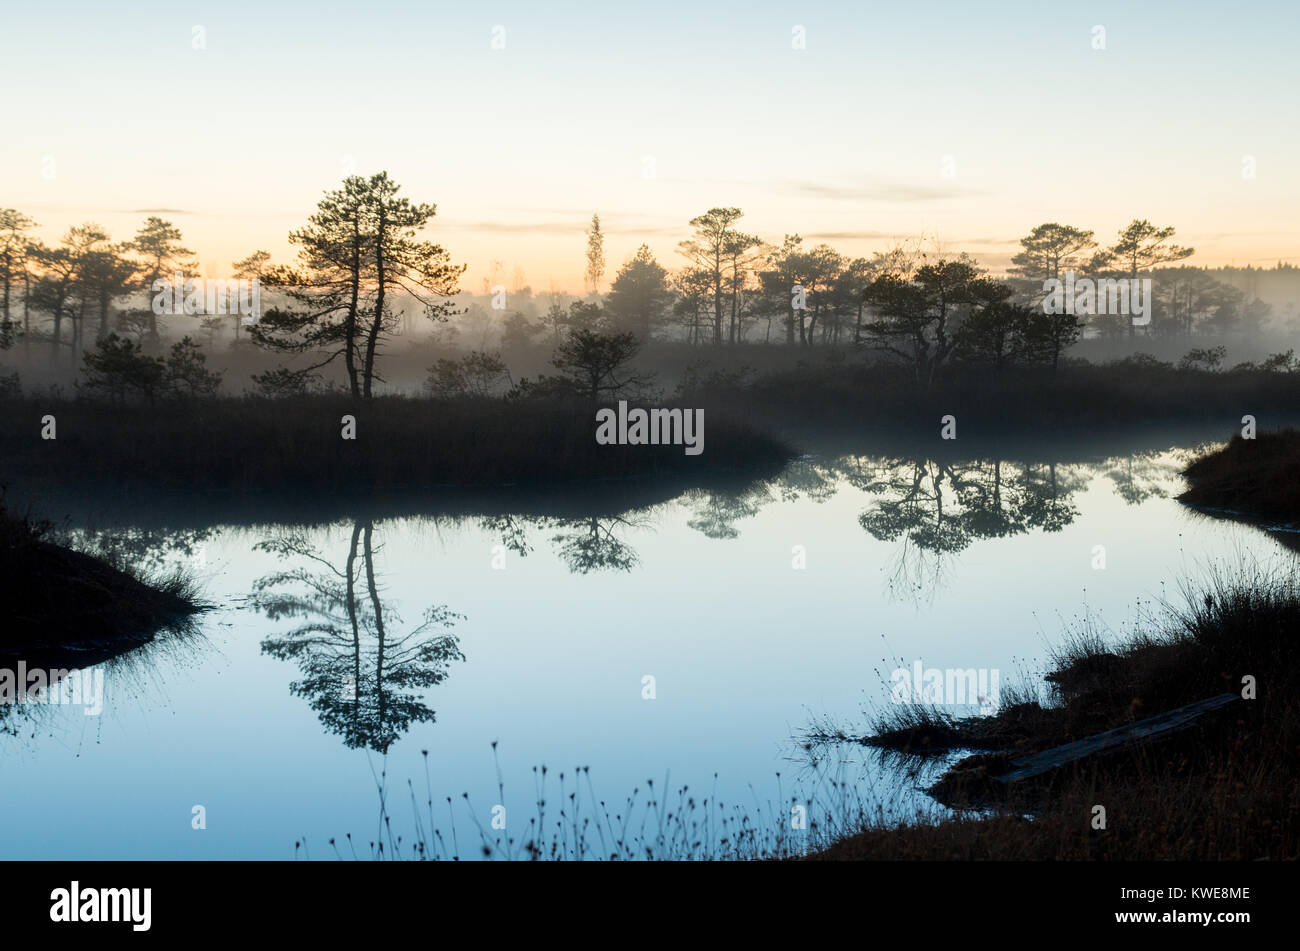 A water pond in Kemeri swamp after sunset with reflections of tree silhouettes and creeping mist. Stock Photo